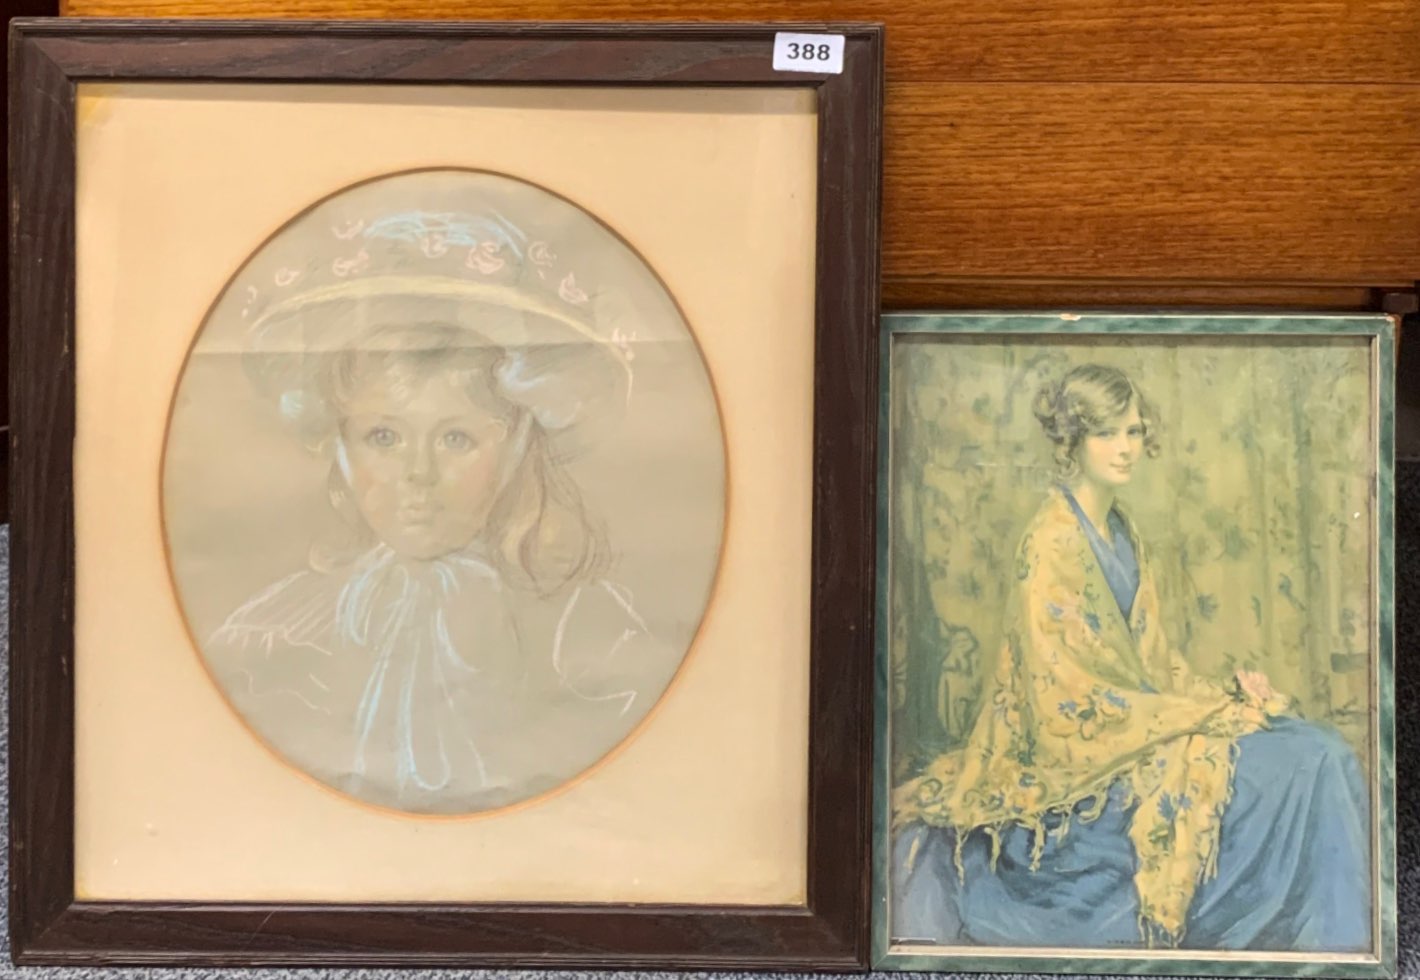 A lovely Edwardian oak framed pastel portrait of a girl, 50 x 54cm. Together with a 1920's print.